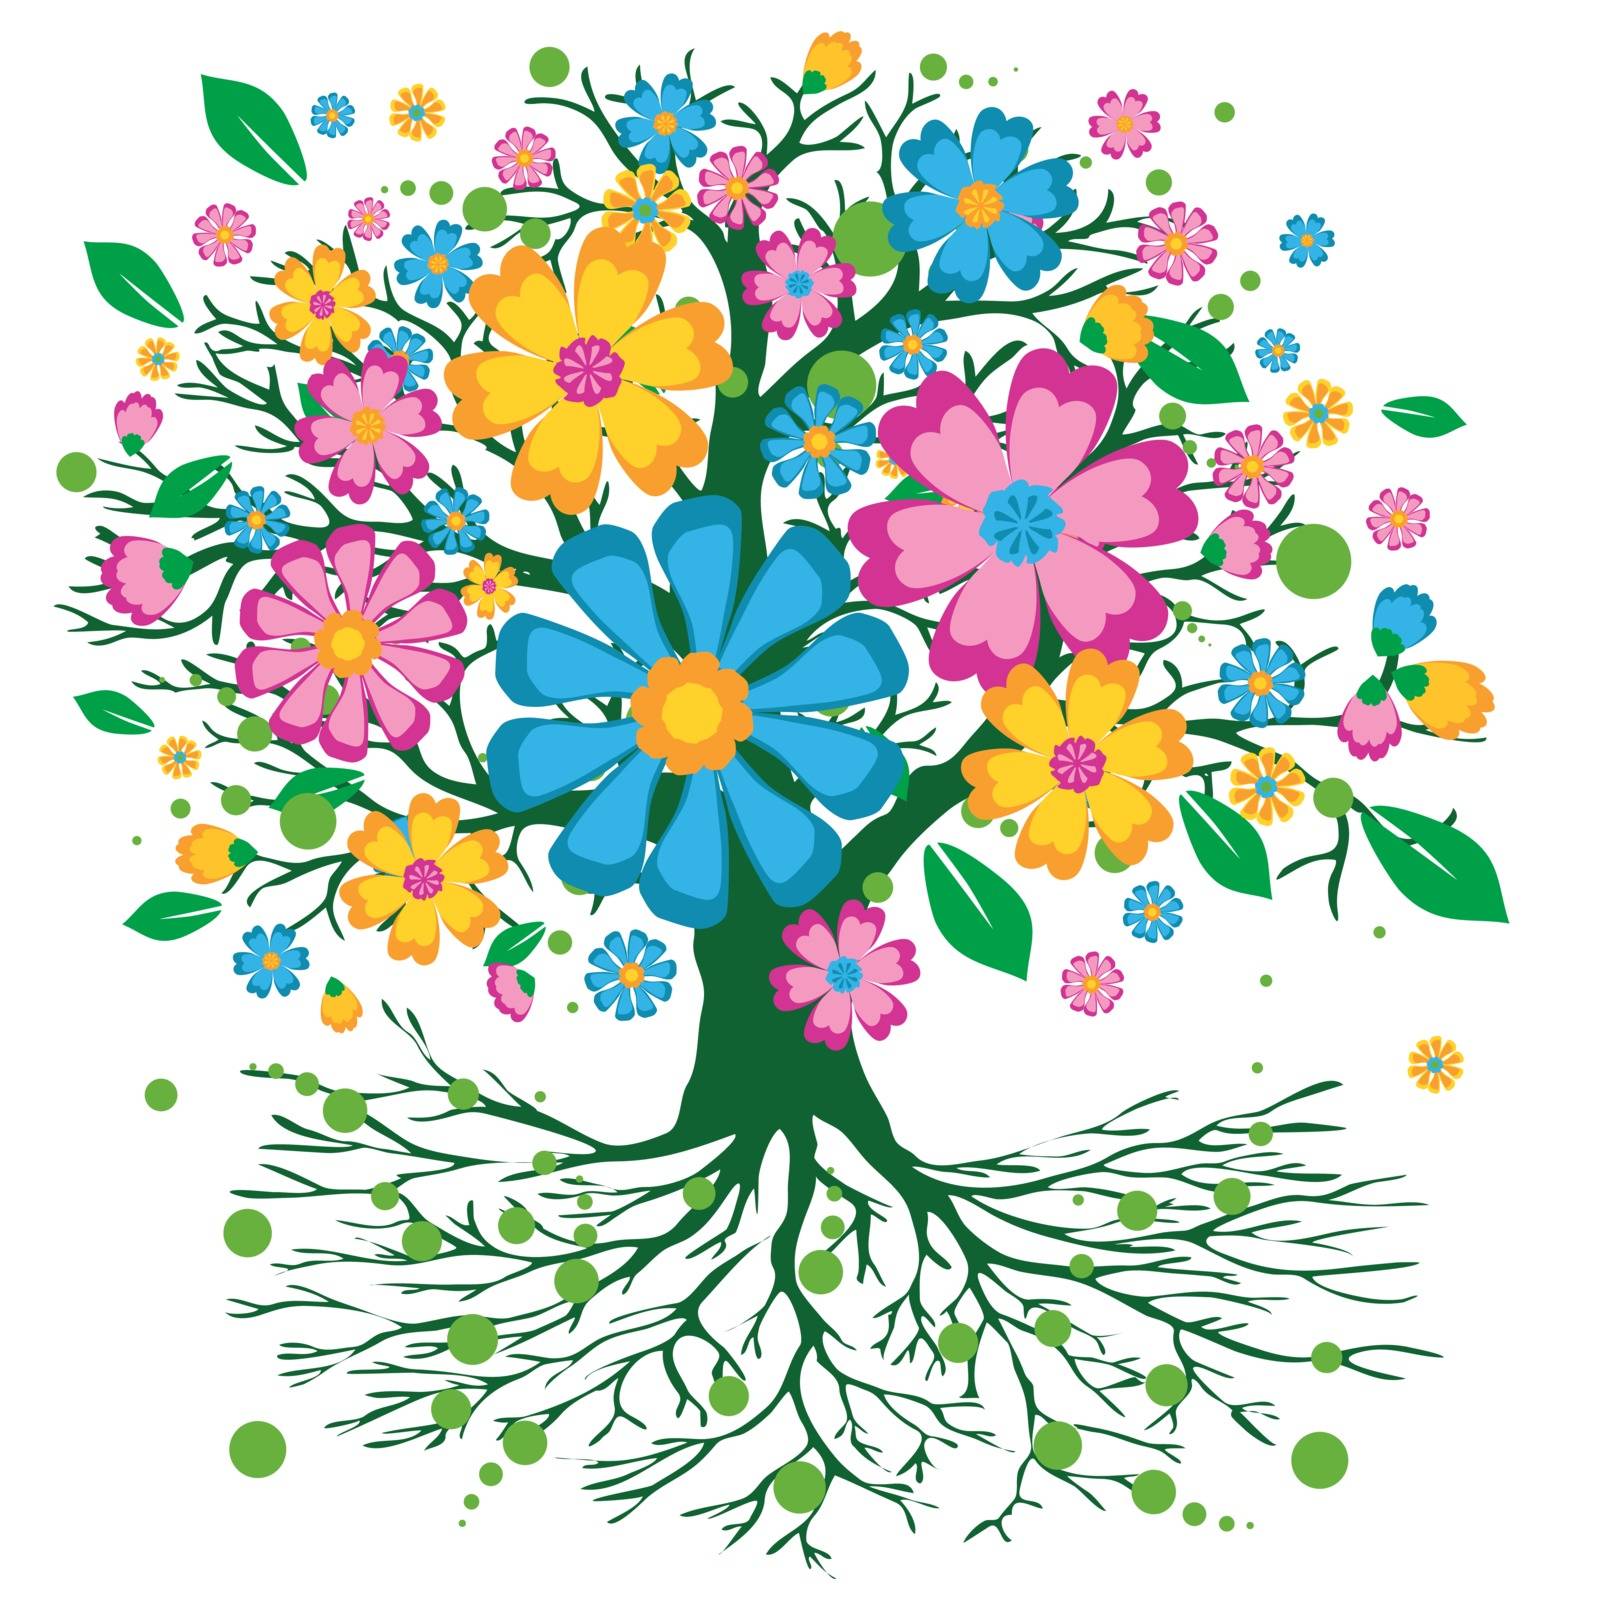 A colorful tree of life with a crown full of colorful flowers. The background is white